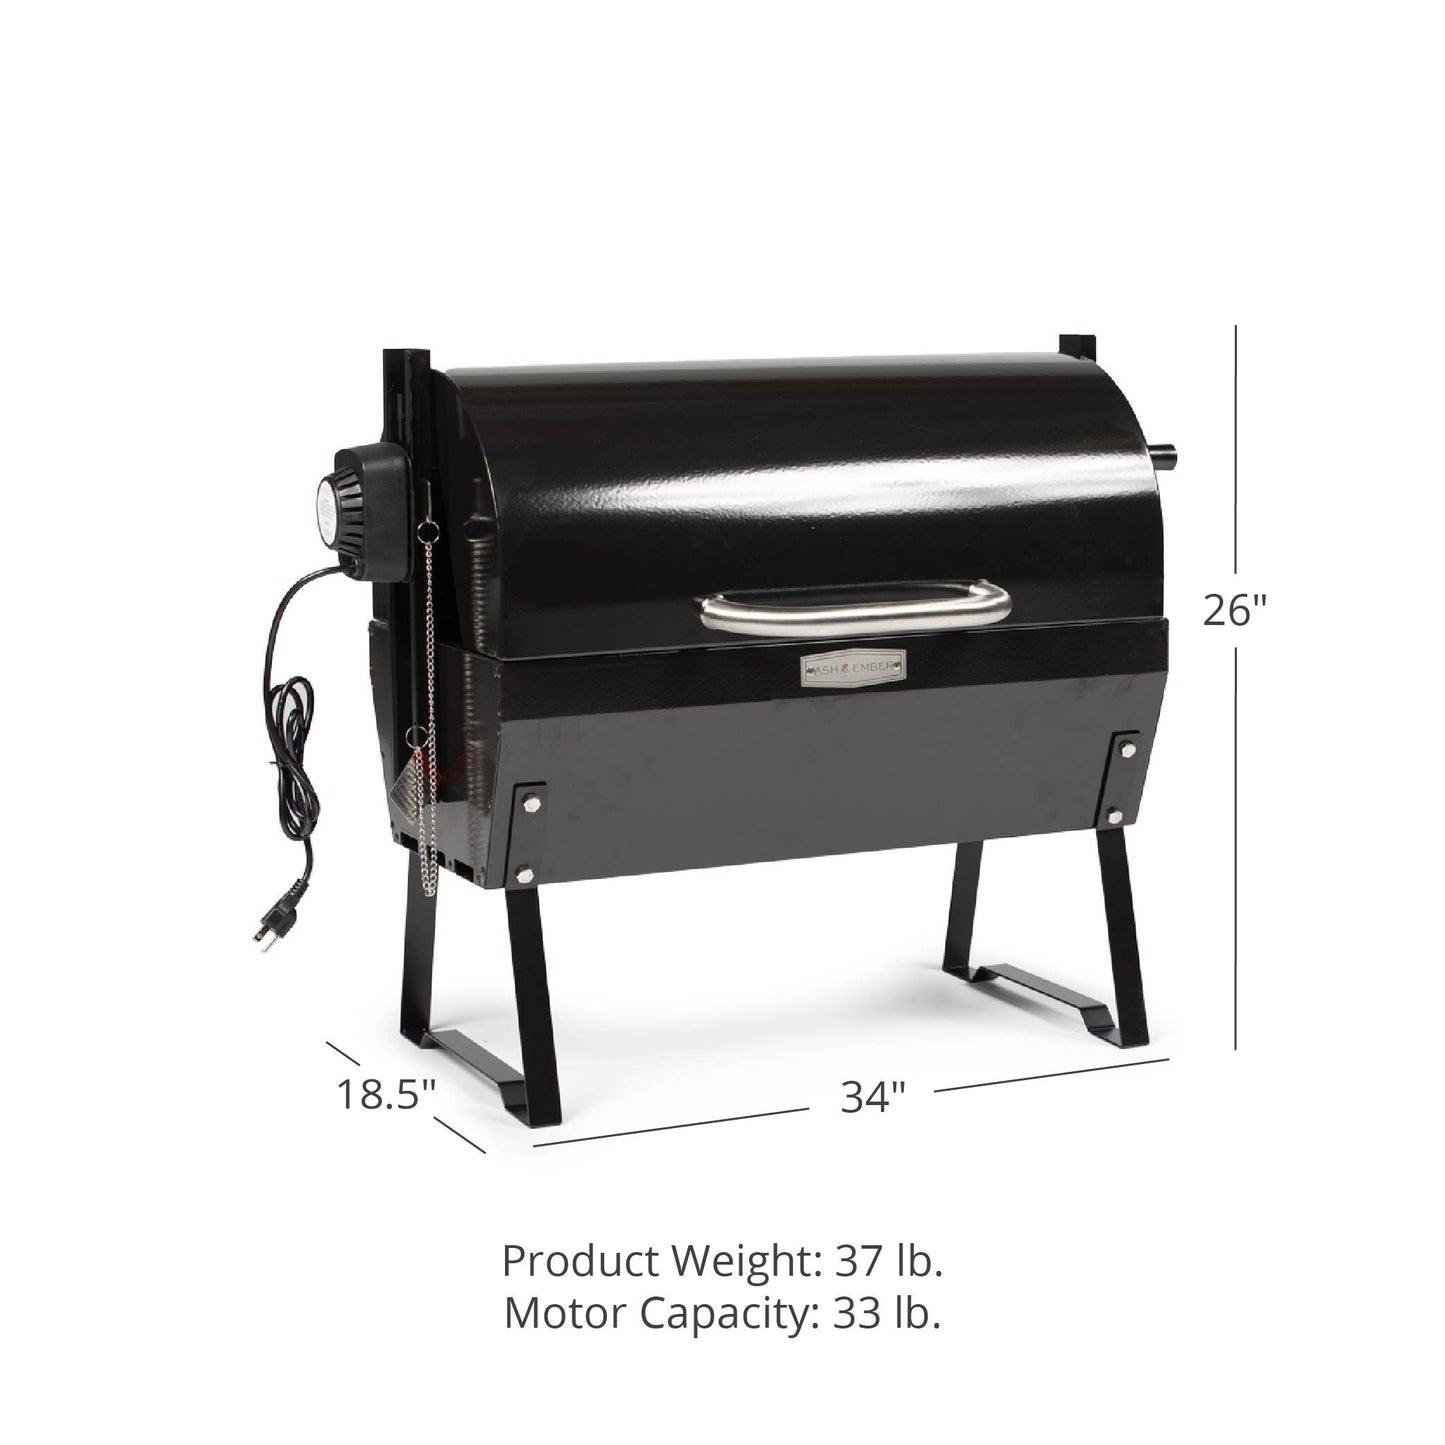 13W Rotisserie Grill with Hood - view 10